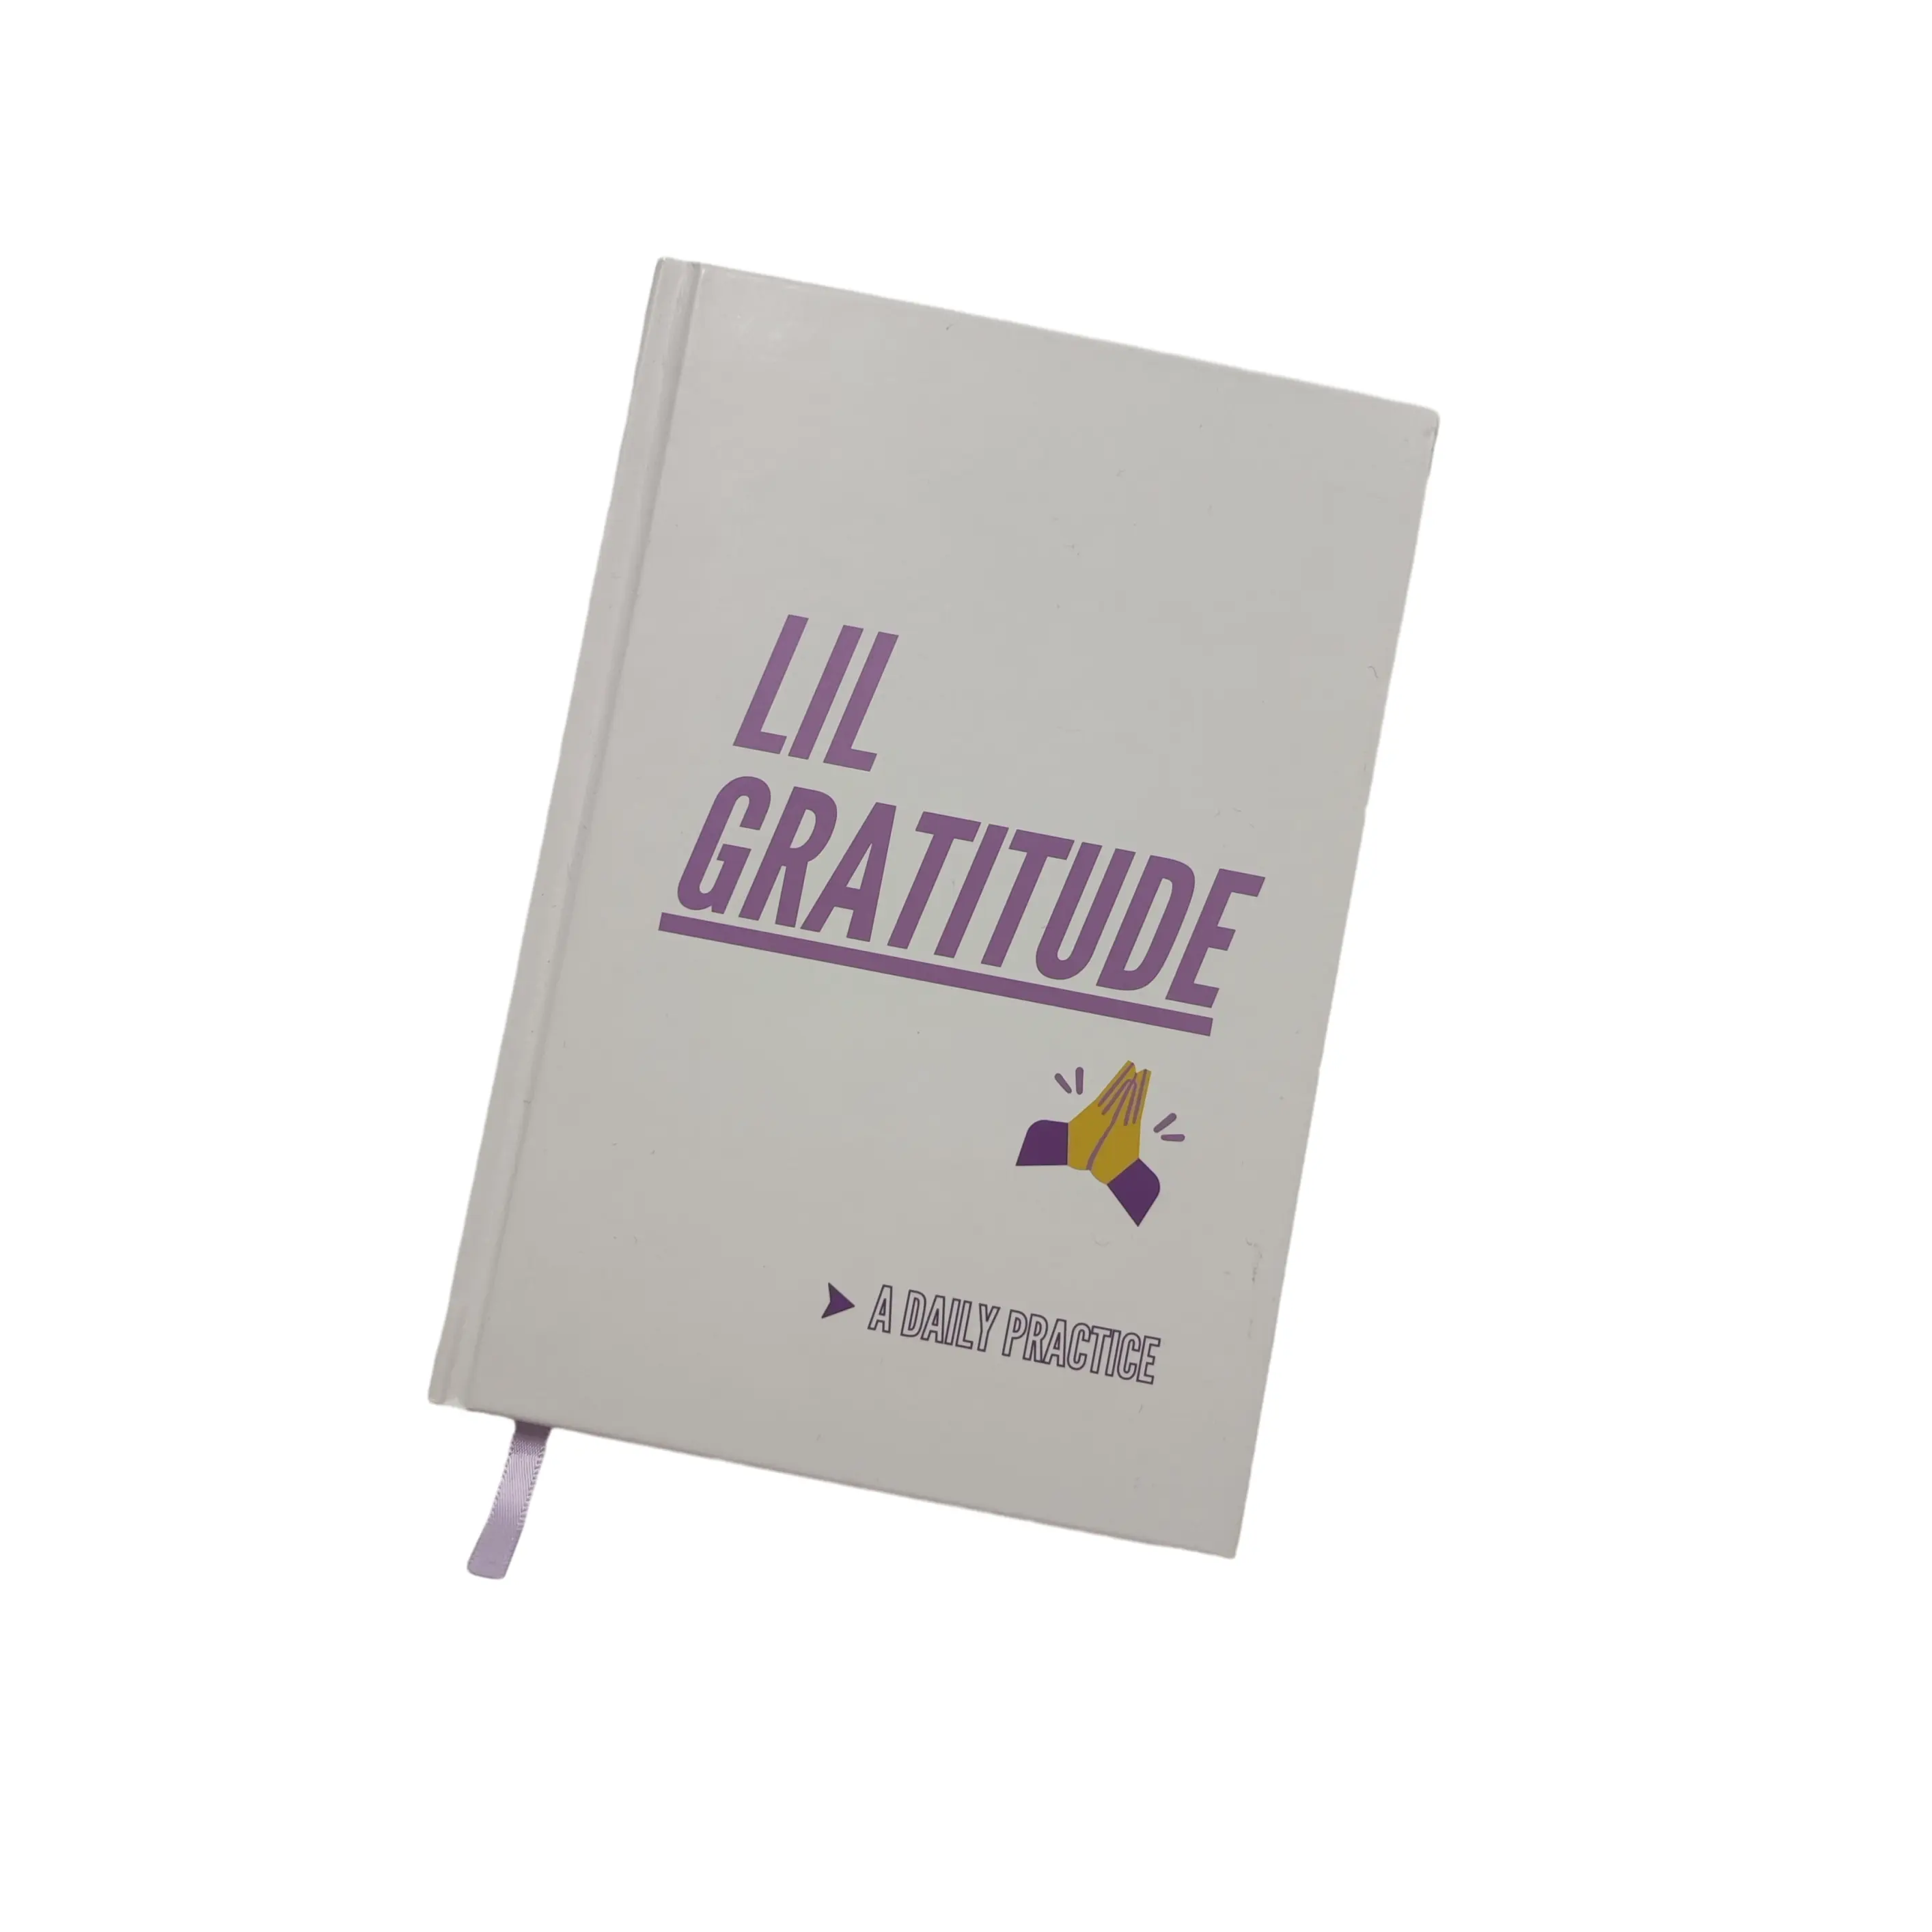 Paper Textured Custom Colorful Graphic and Design A5 Size Gratitude Journal Diary Manifestation Notebook